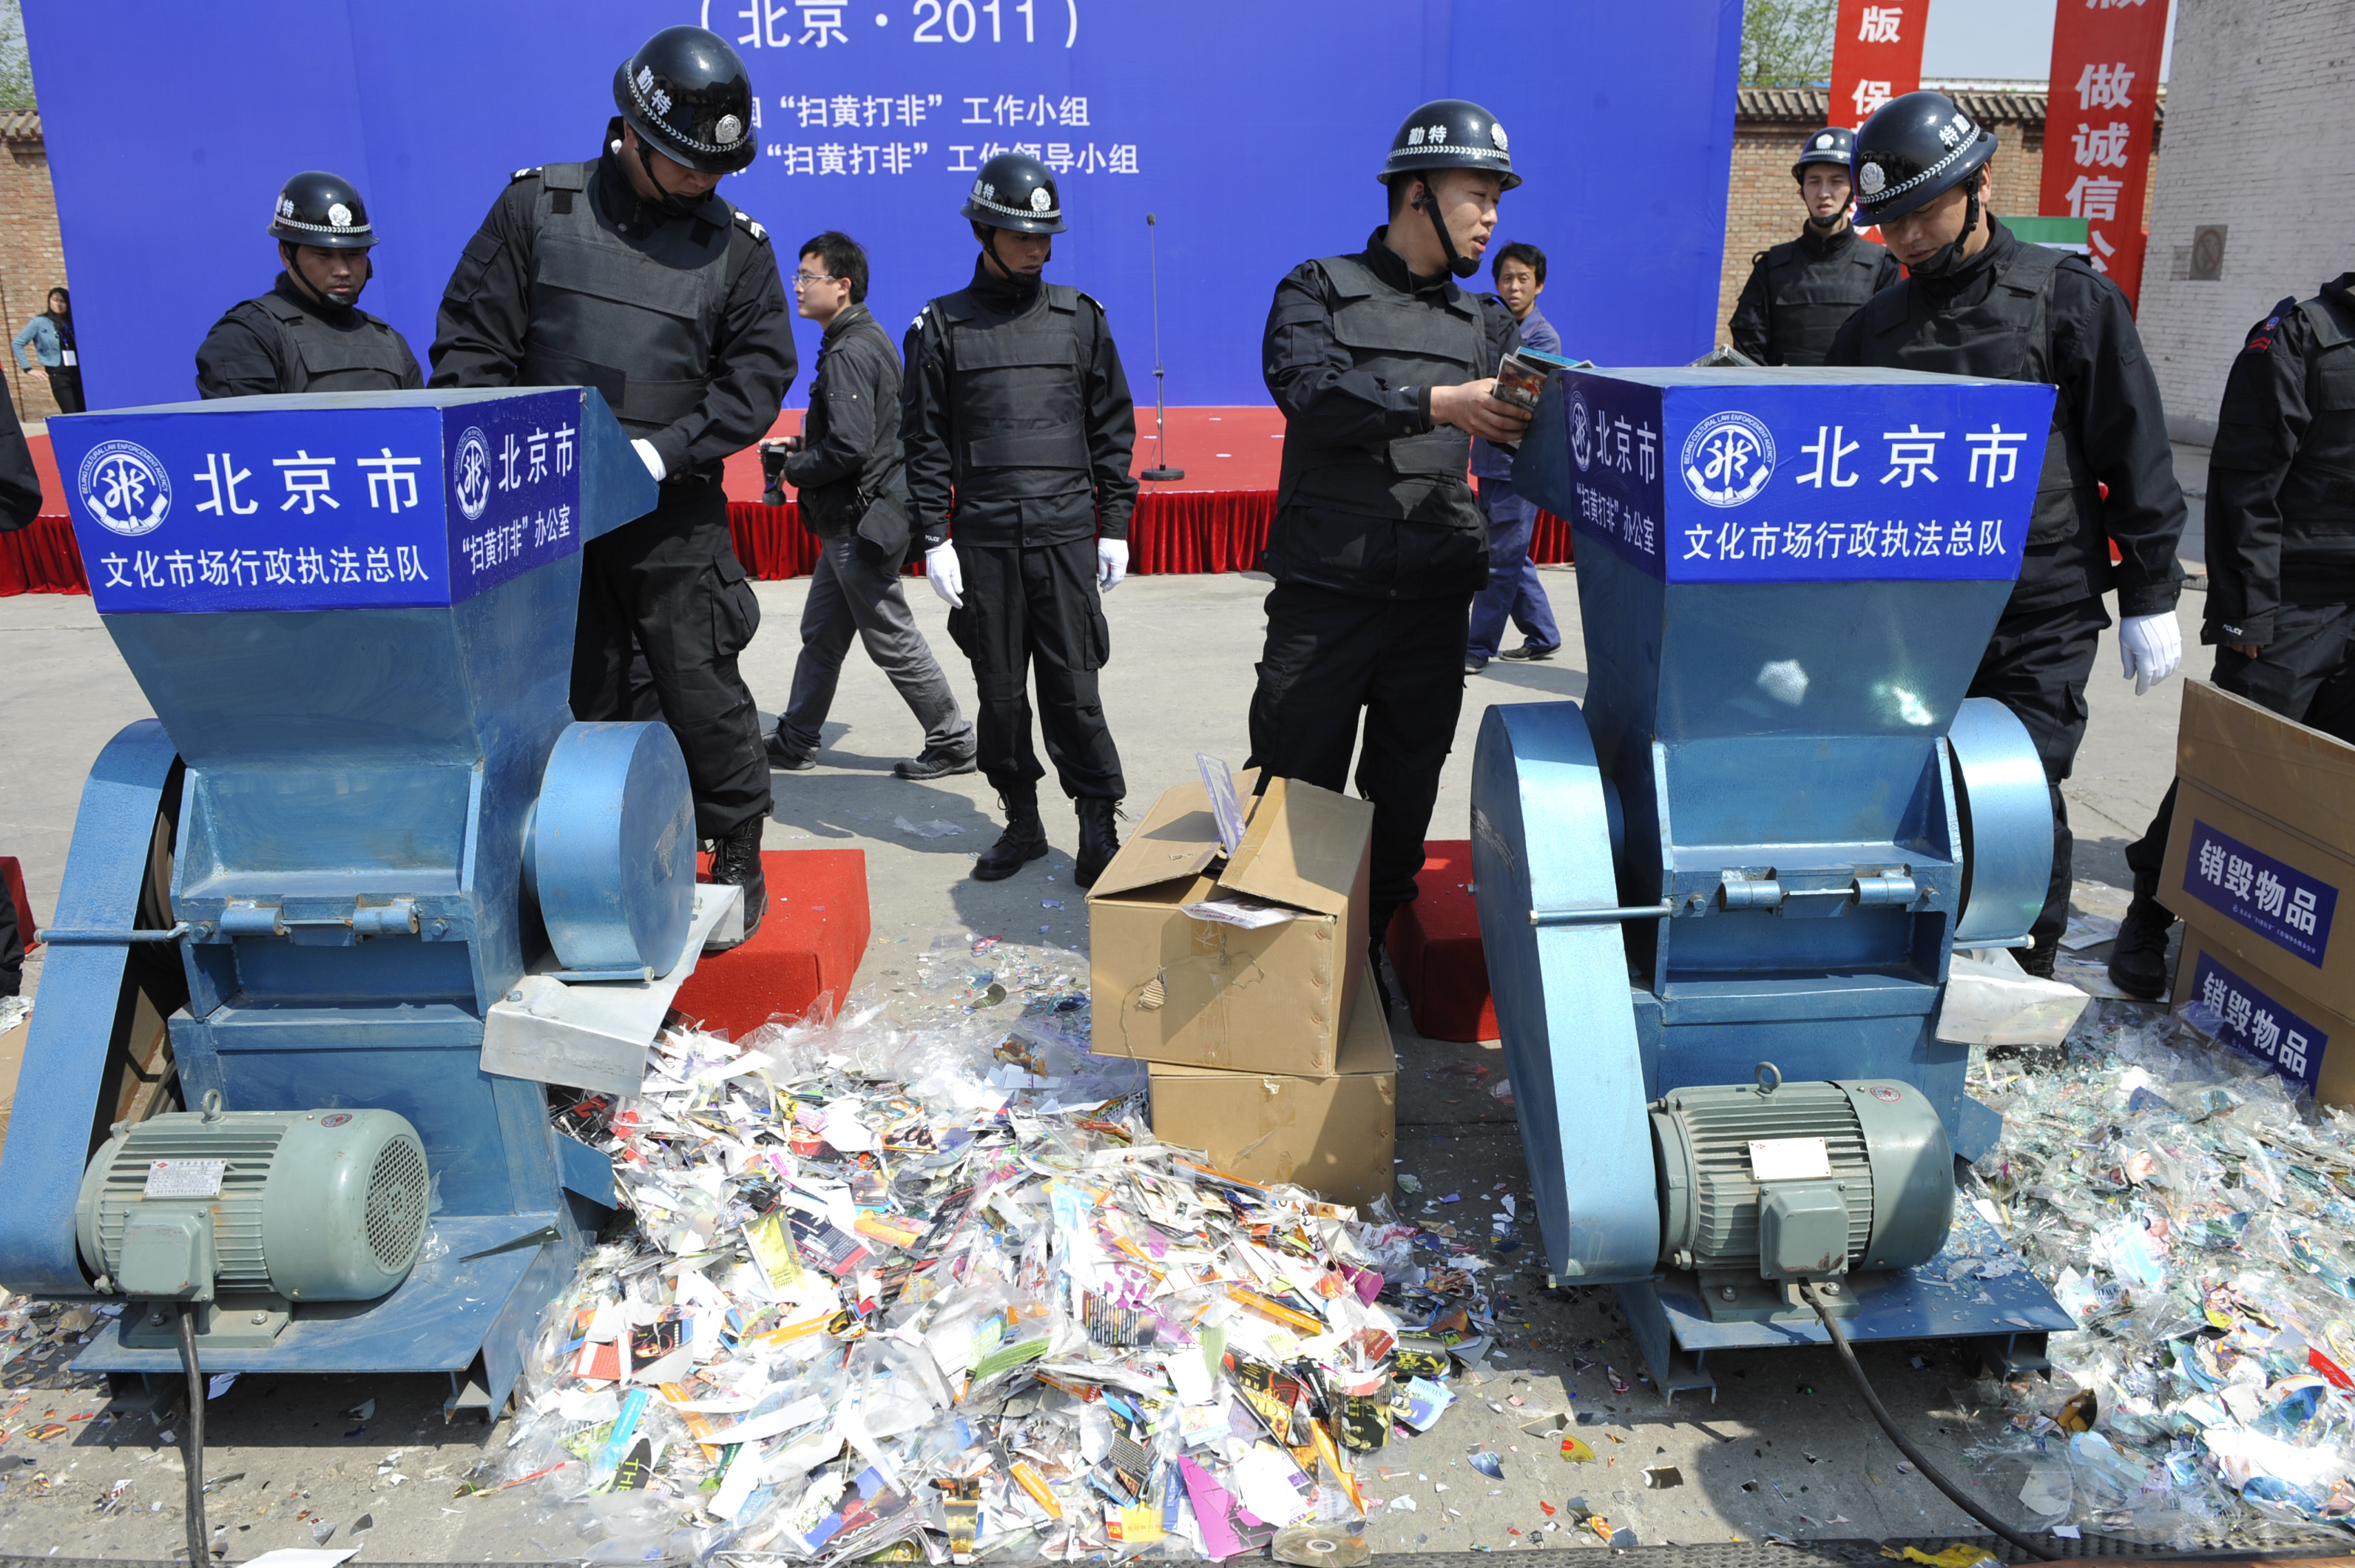 Chinese officials launch a ceremony to destroy thousands of pornographic books and video materials in Beijing on April 24, 2011. (AFP/Getty Images)